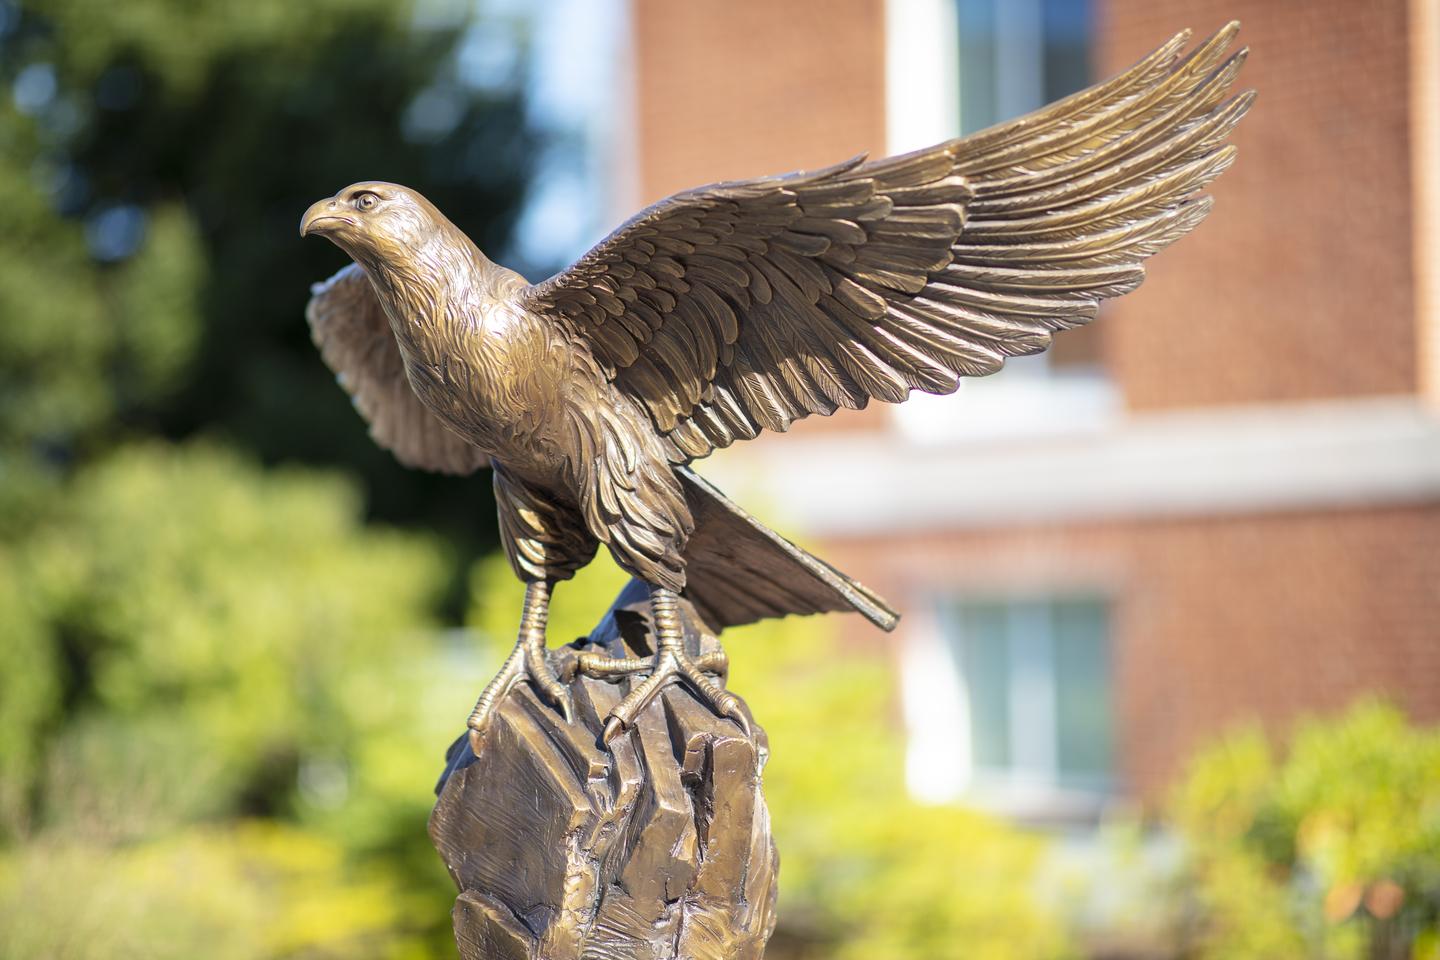 This image is of the Falcon statue in front of the Bentley library